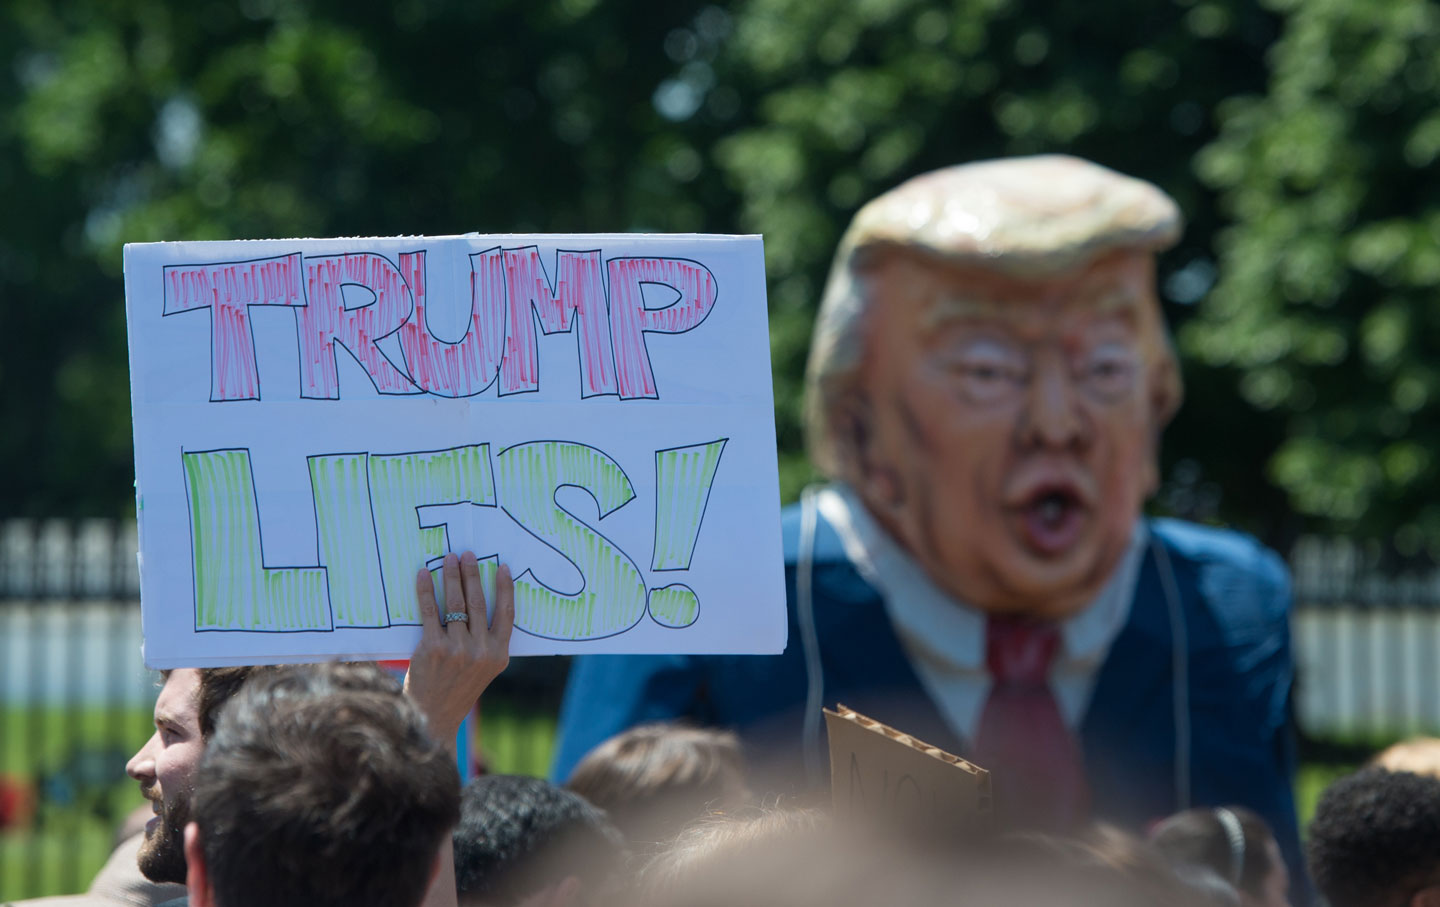 A protester holds up a sign while a person walks around in a caricature of Trump during a peaceful protest